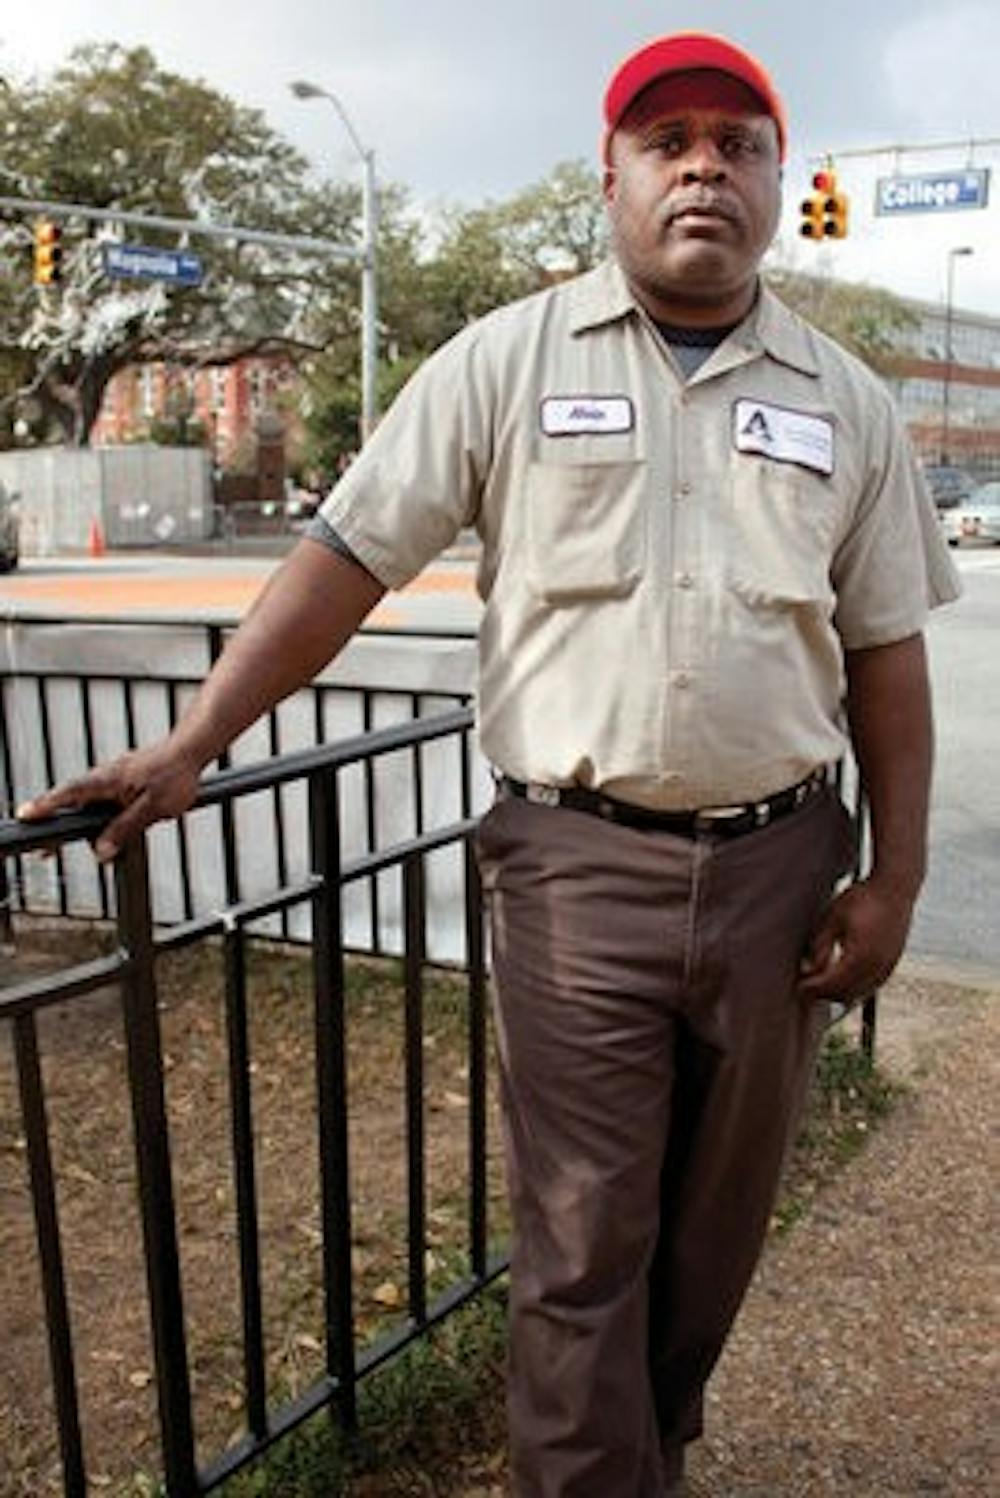 Alvin Willis has been working for the city of Auburn for 20 years. He leads the Toomer's Corner cleanup team and keeps the streets downtown clean daily. (Emily Adams / photo editor)